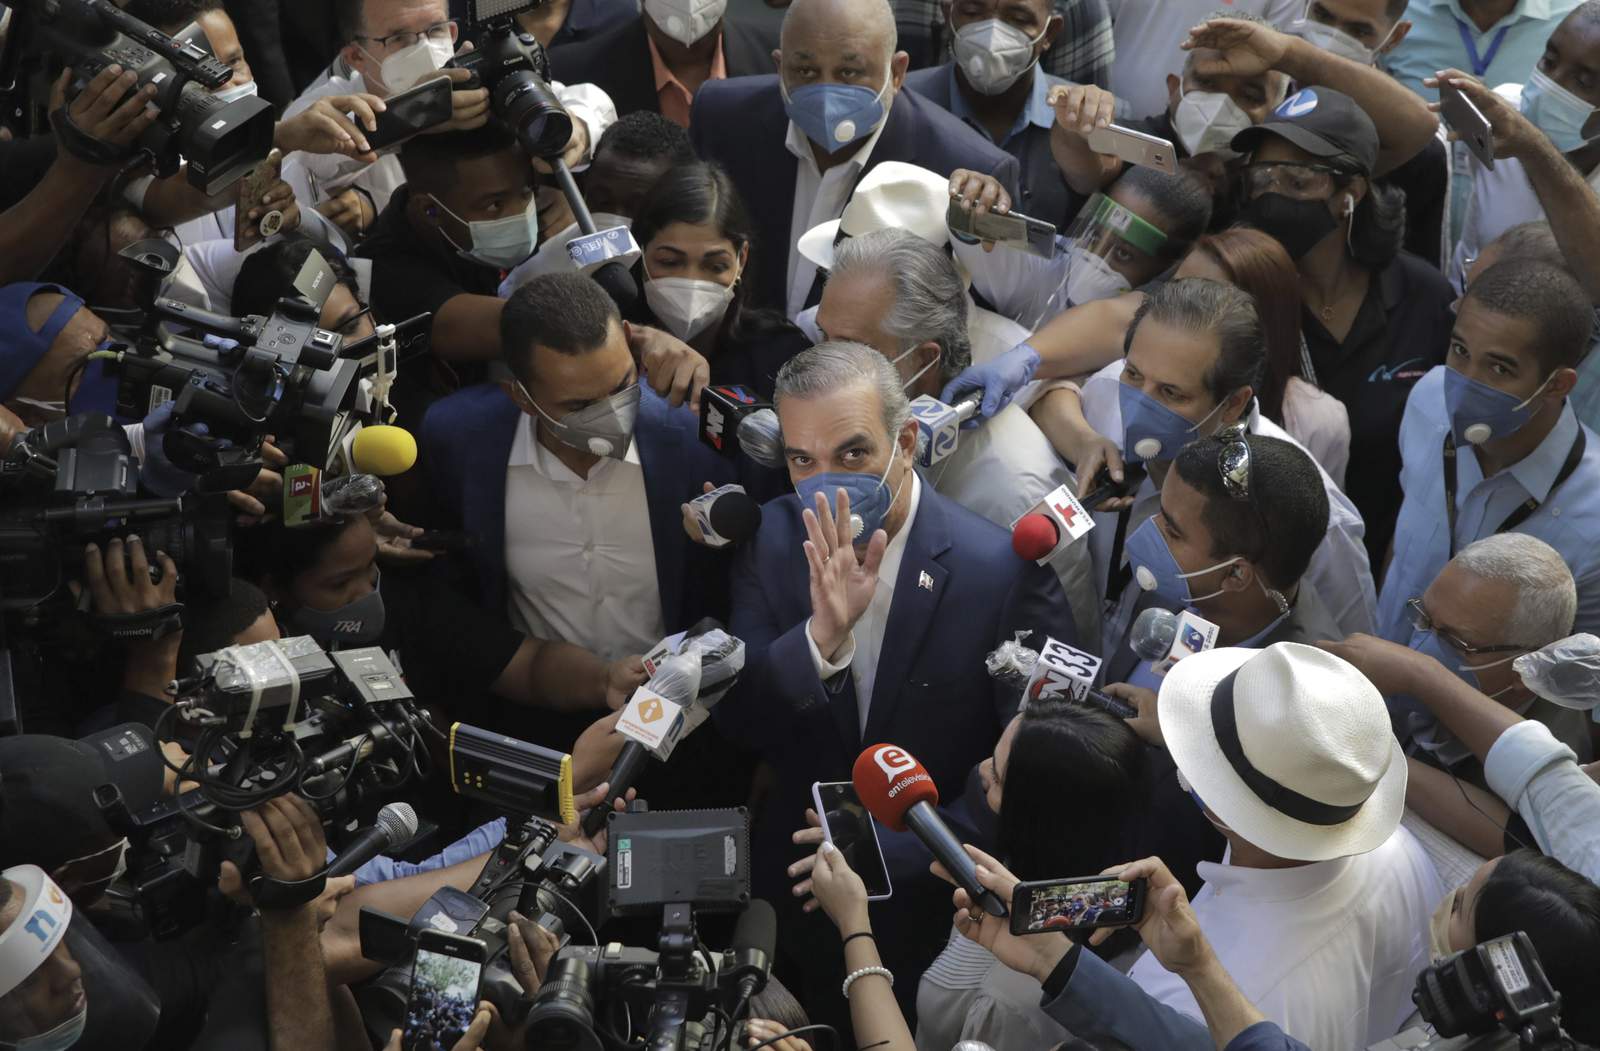 Dominican Republic chooses leader amid rising COVID-19 cases